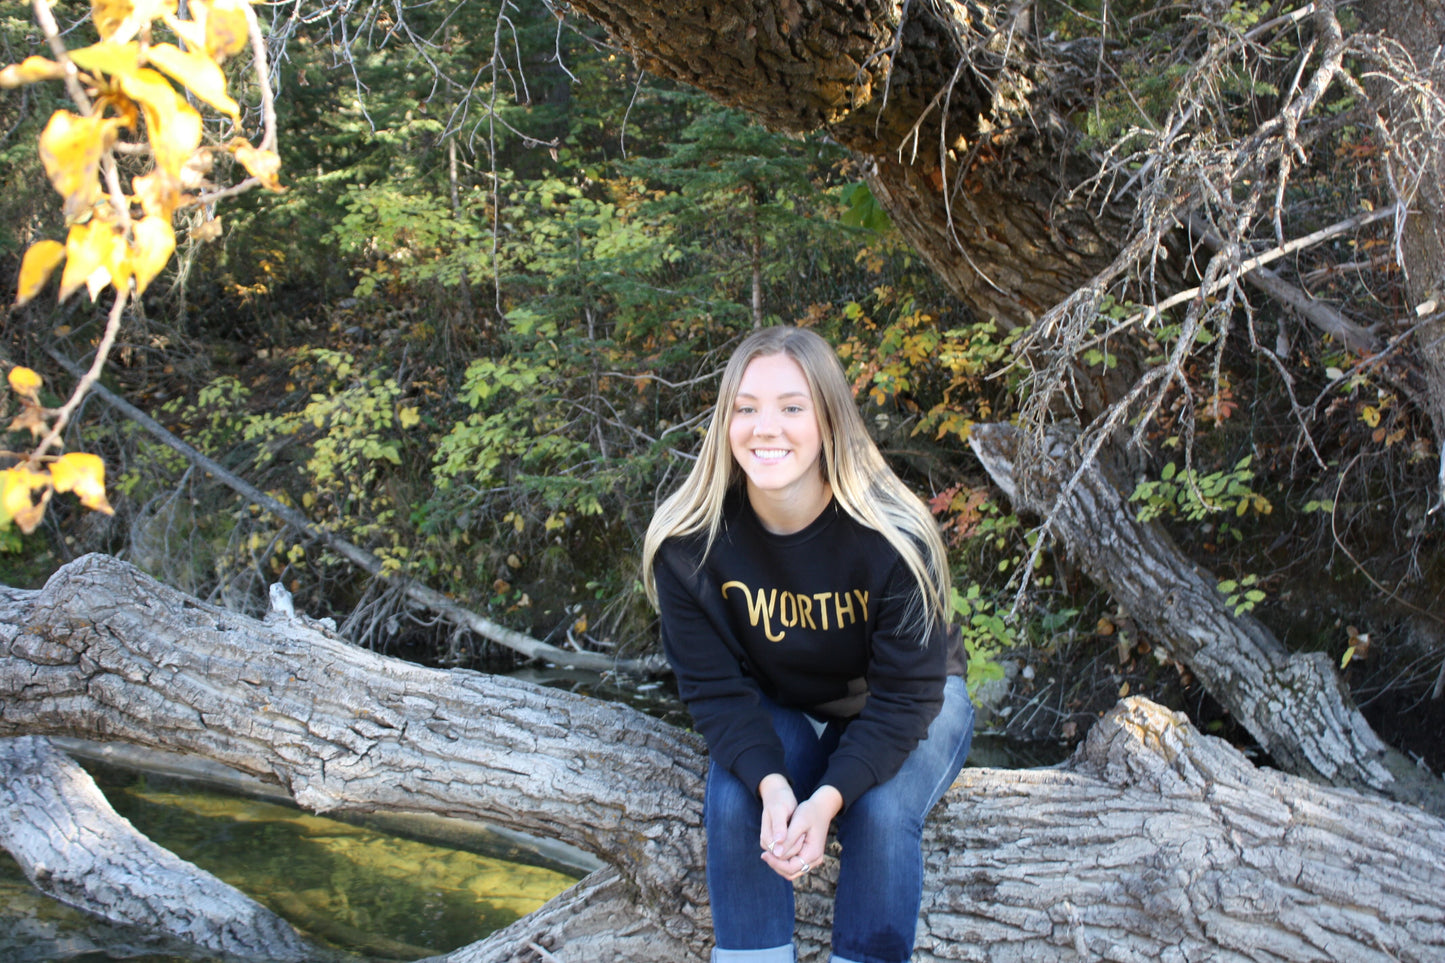 Woman sitting outside on a log, wearing a fitted black pullover sweater with "WORTHY" printed across the front in gold lettering.